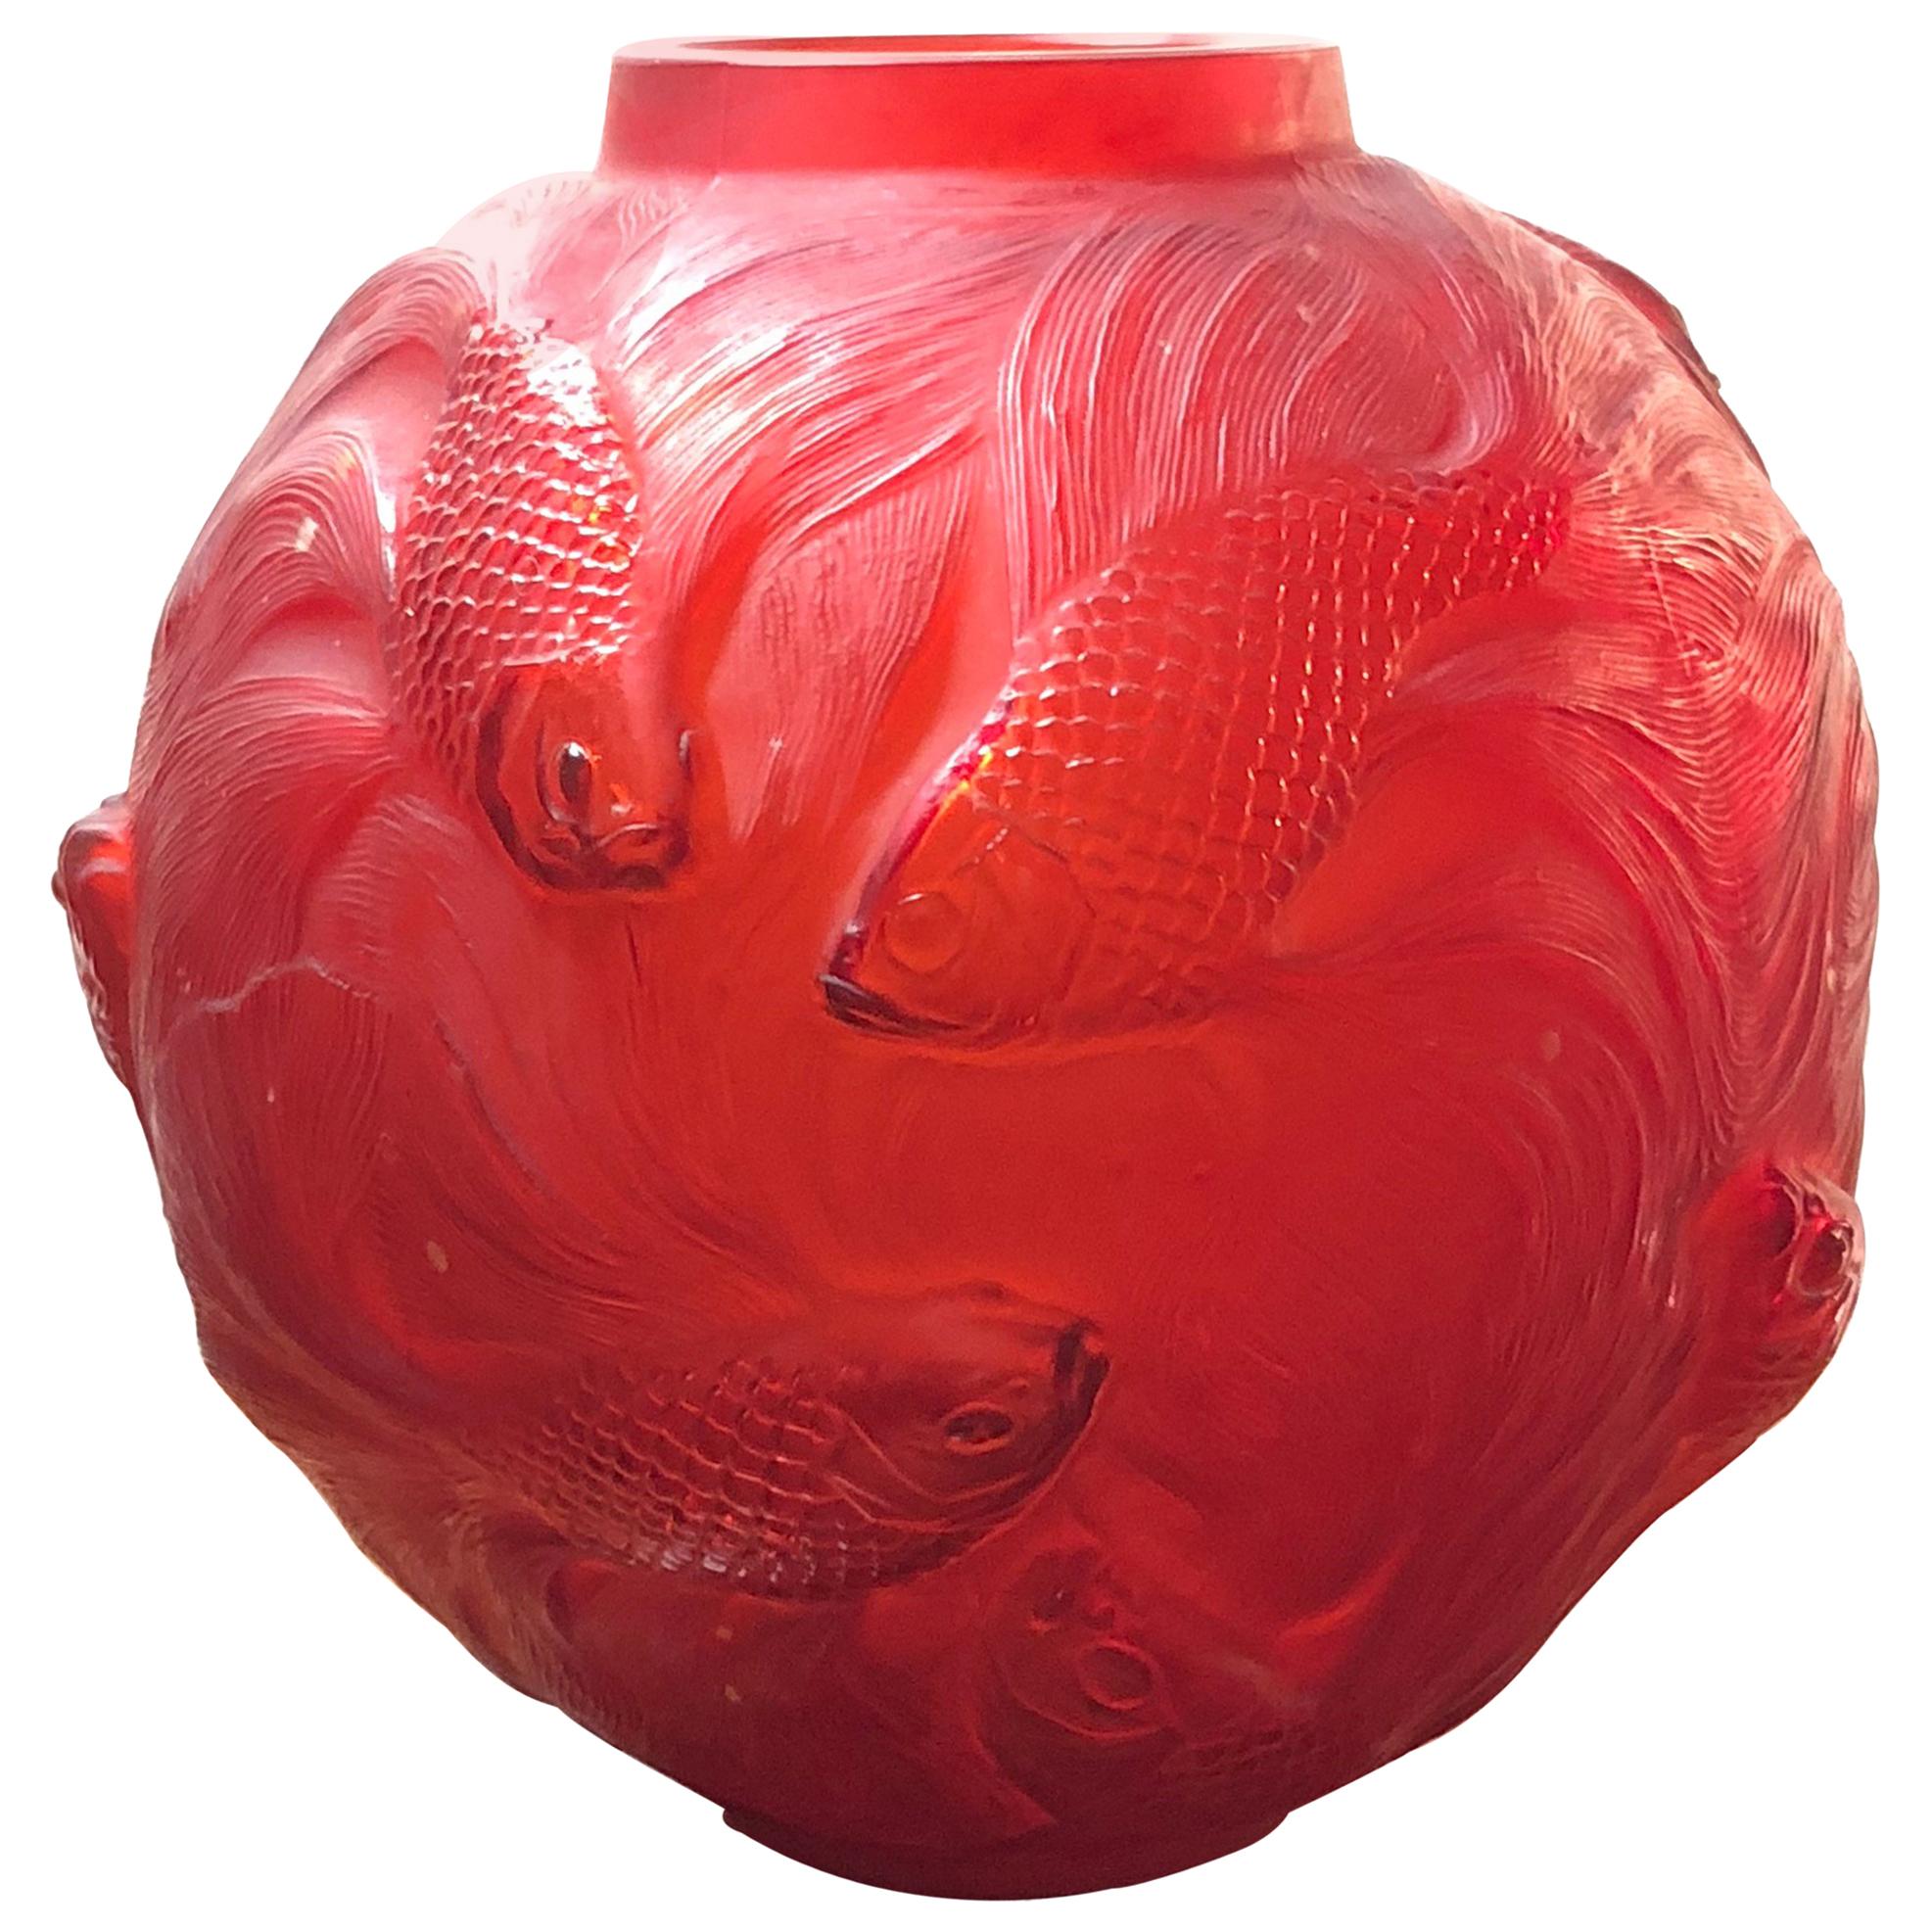 1924 Rene Lalique Formose Vase in Double Cased Red Tomato Glass, Fishes Design